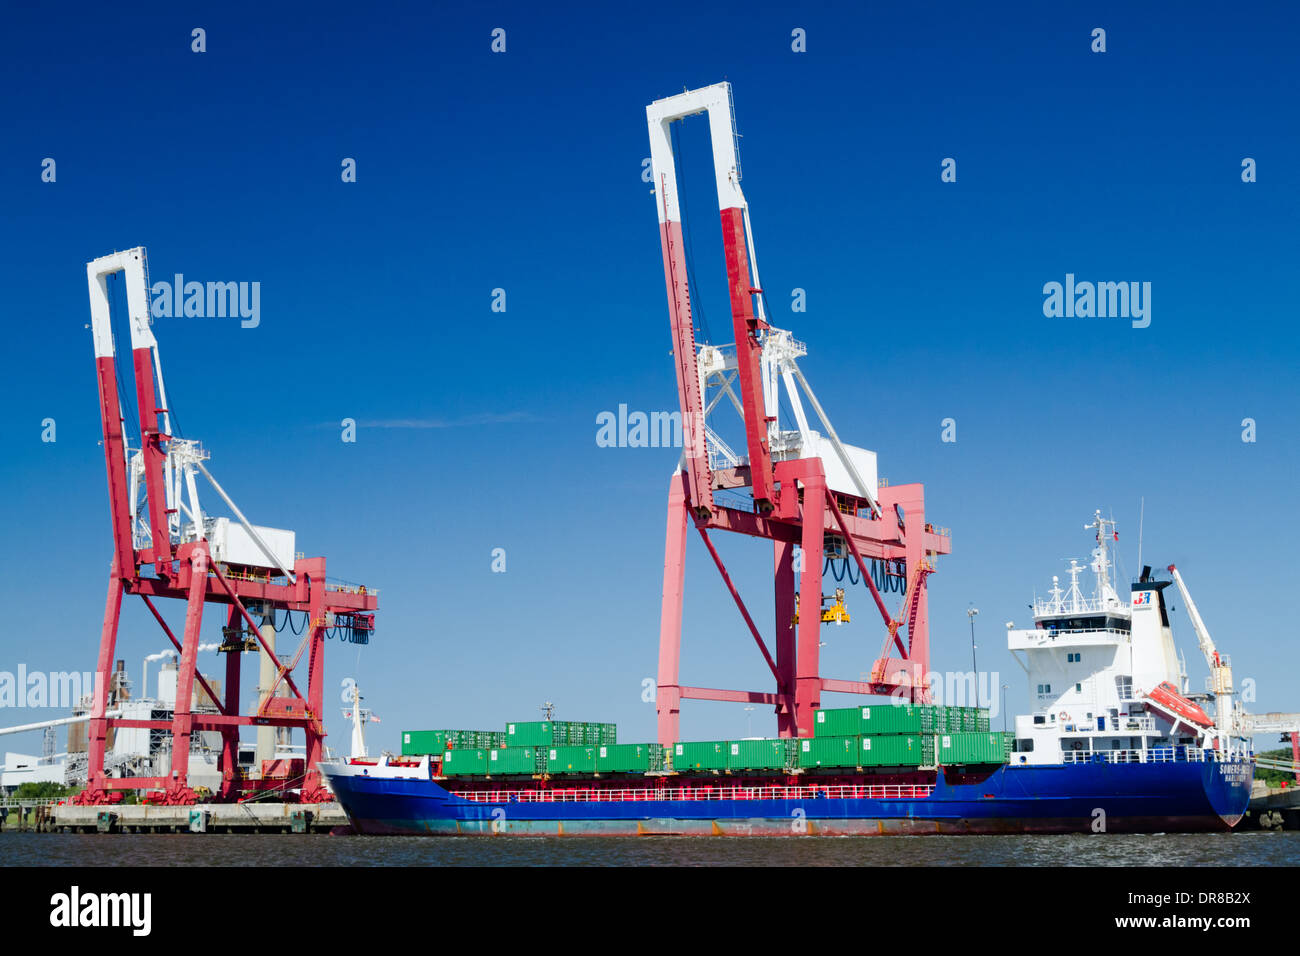 A commercial container ship in port in Fernandina Beach, Florida. Stock Photo